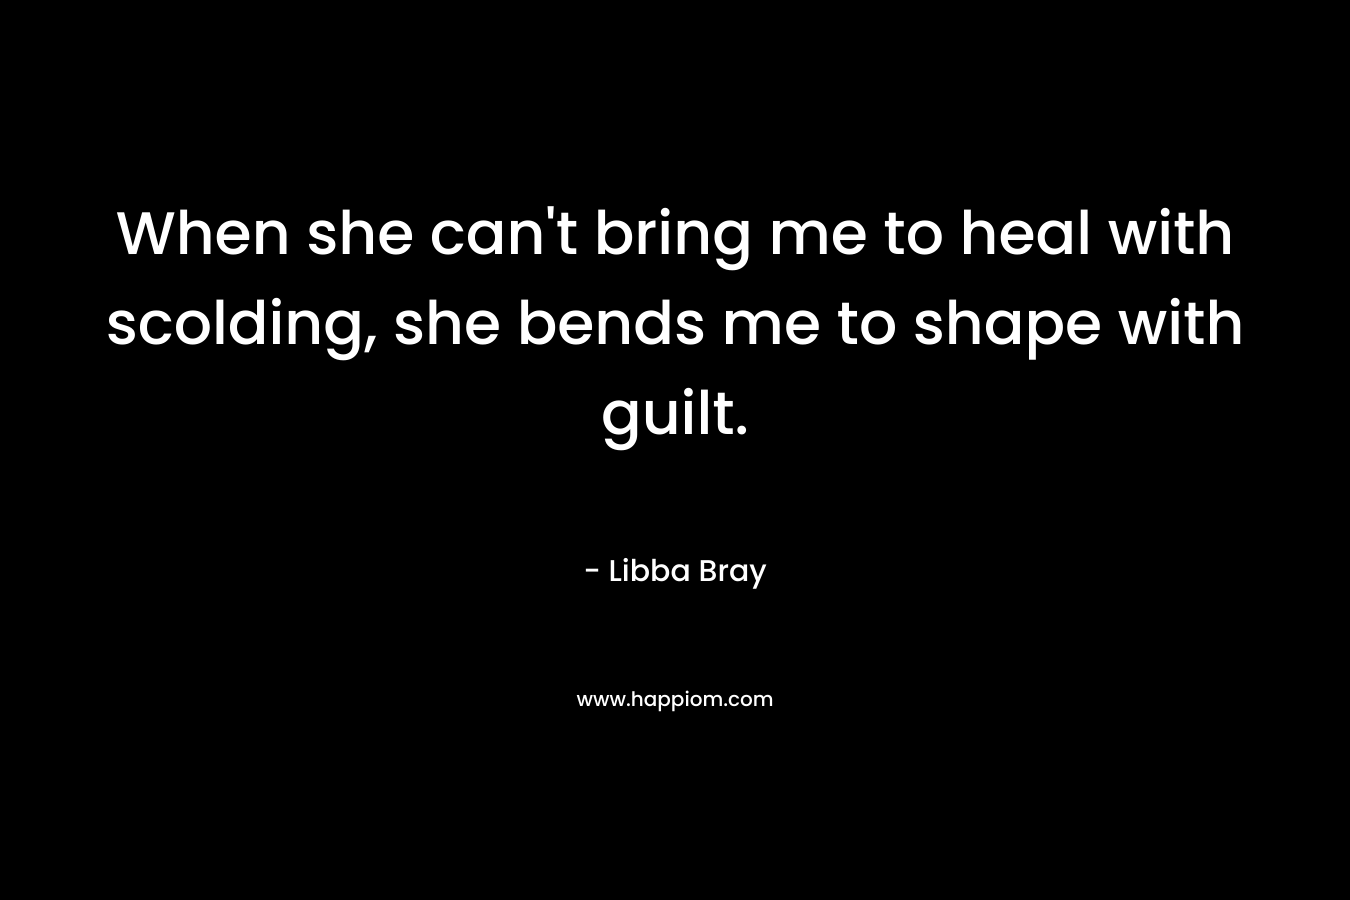 When she can't bring me to heal with scolding, she bends me to shape with guilt.